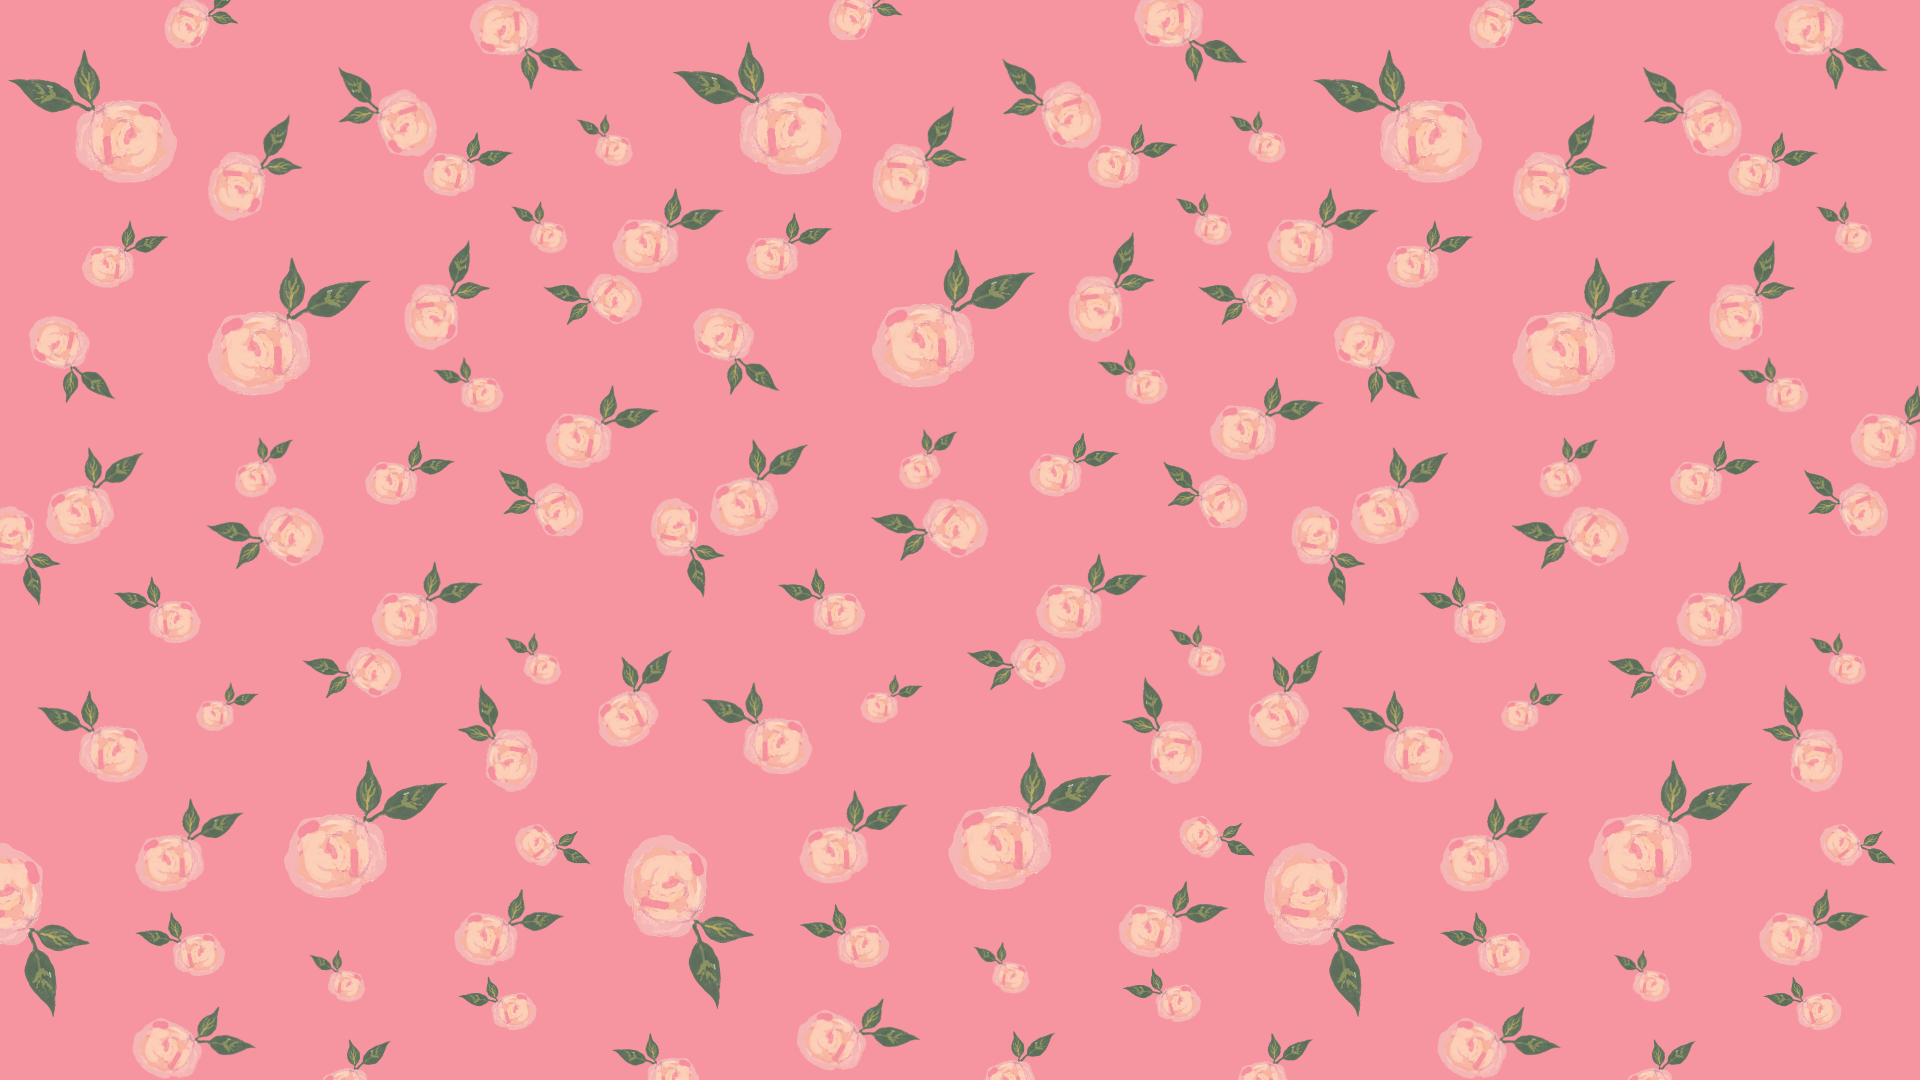 A pink background with flowers on it - Valentine's Day